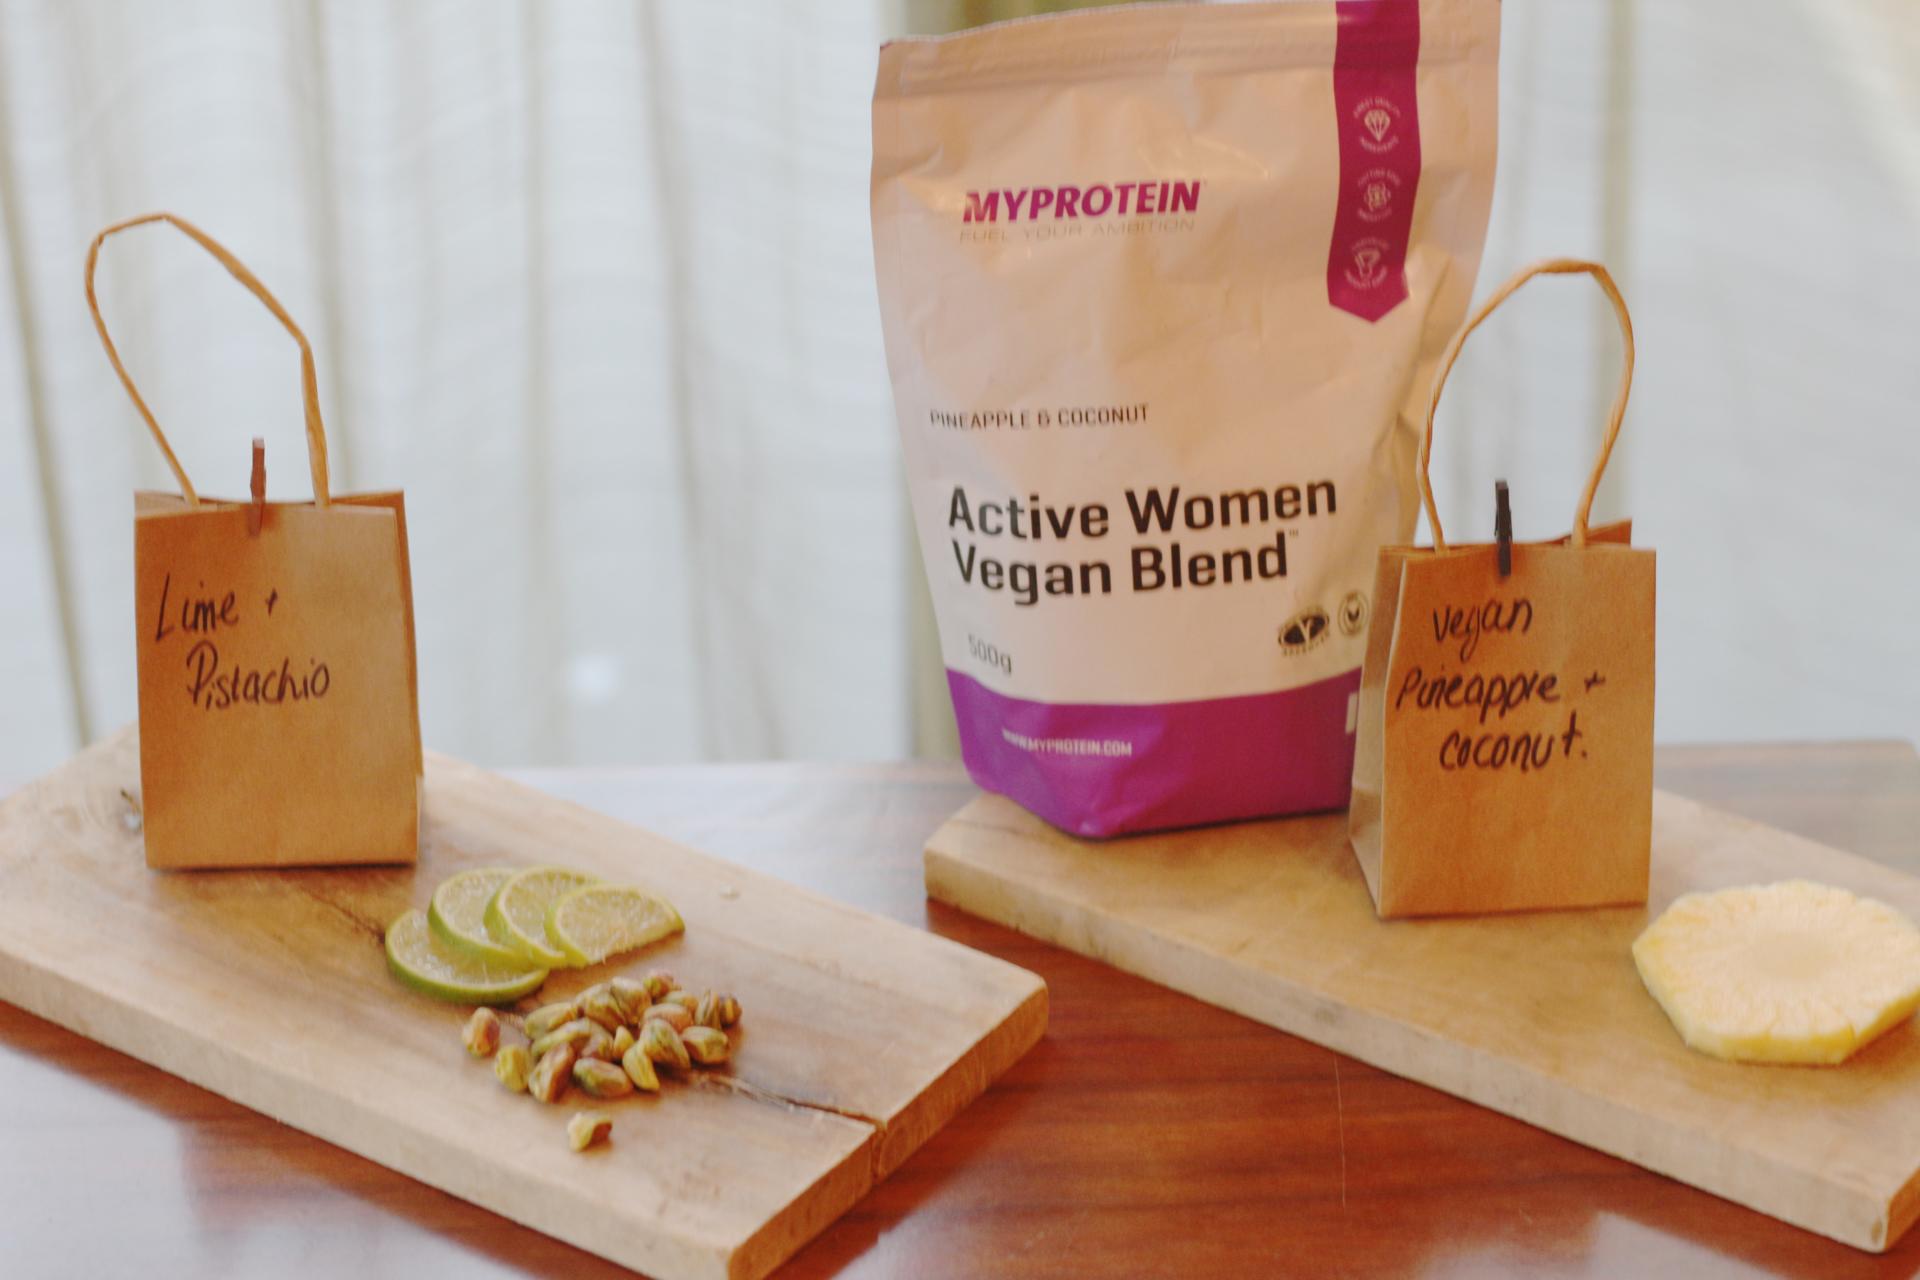 Myprotein Active Women Launch at Hale Country Club